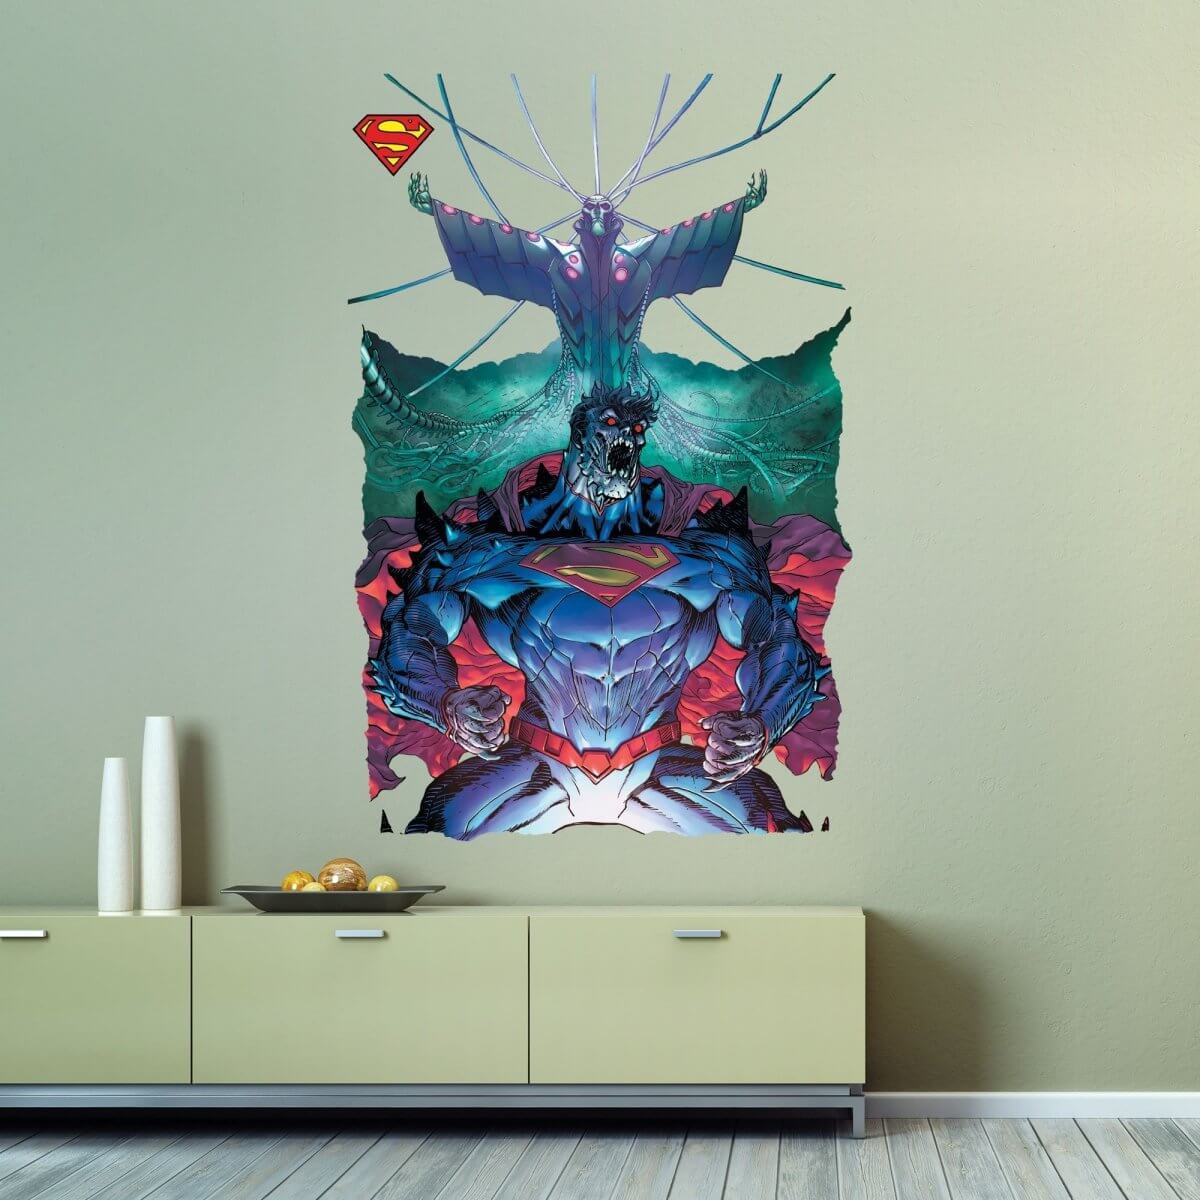 Kismet Decals Superman: Doomed #2 Comic Cover Series Licensed Wall Sticker - Easy DIY Home & Room Decor Wall Art - Kismet Decals